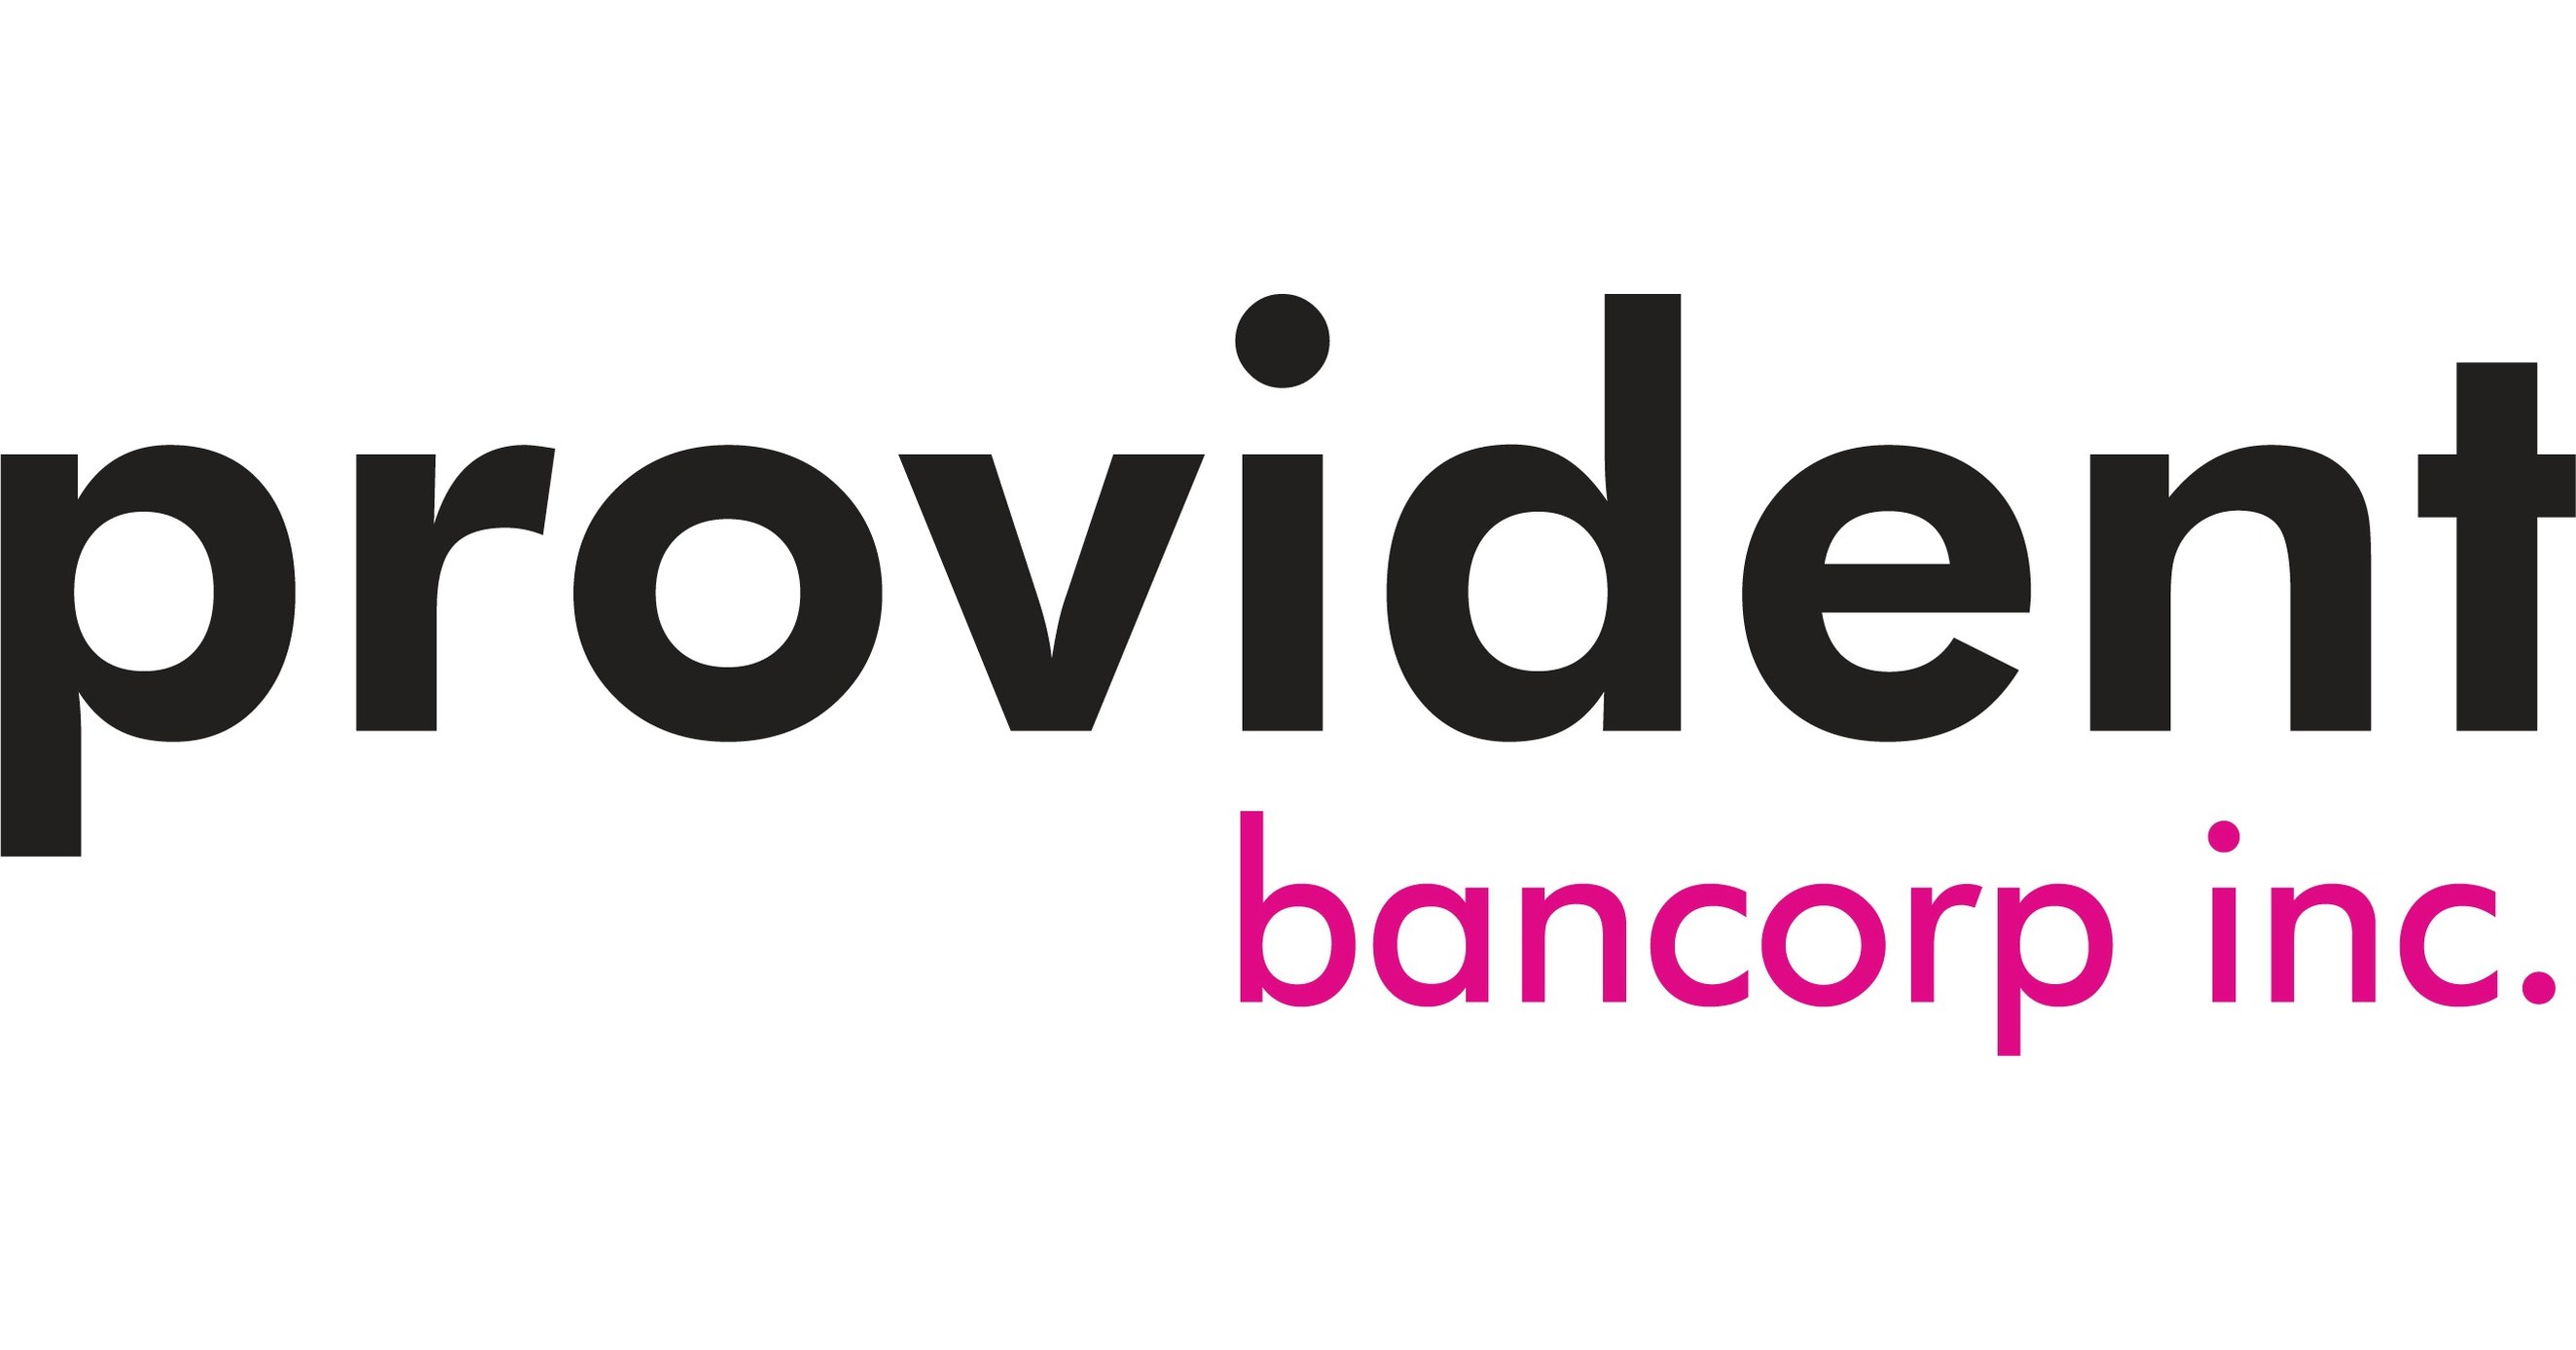 PROVIDENT BANCORP, INC. PROVIDES EARNINGS GUIDANCE FOR THE THIRD QUARTER OF 2022